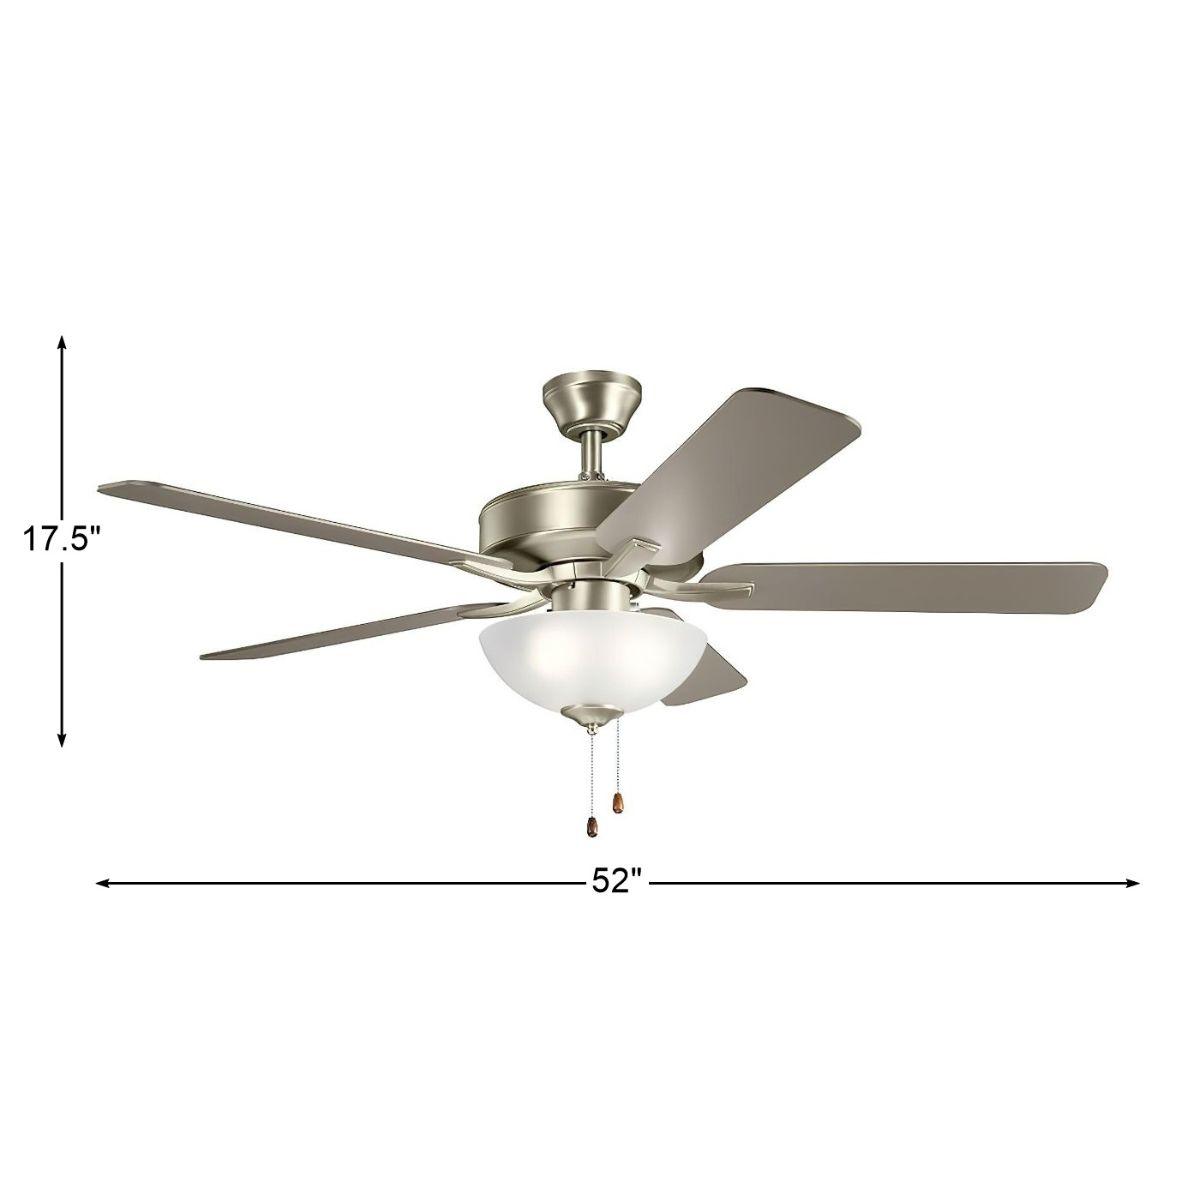 Basics Pro 52 Inch Ceiling Fan With 2 Light And Pull Chain, Etched Glass